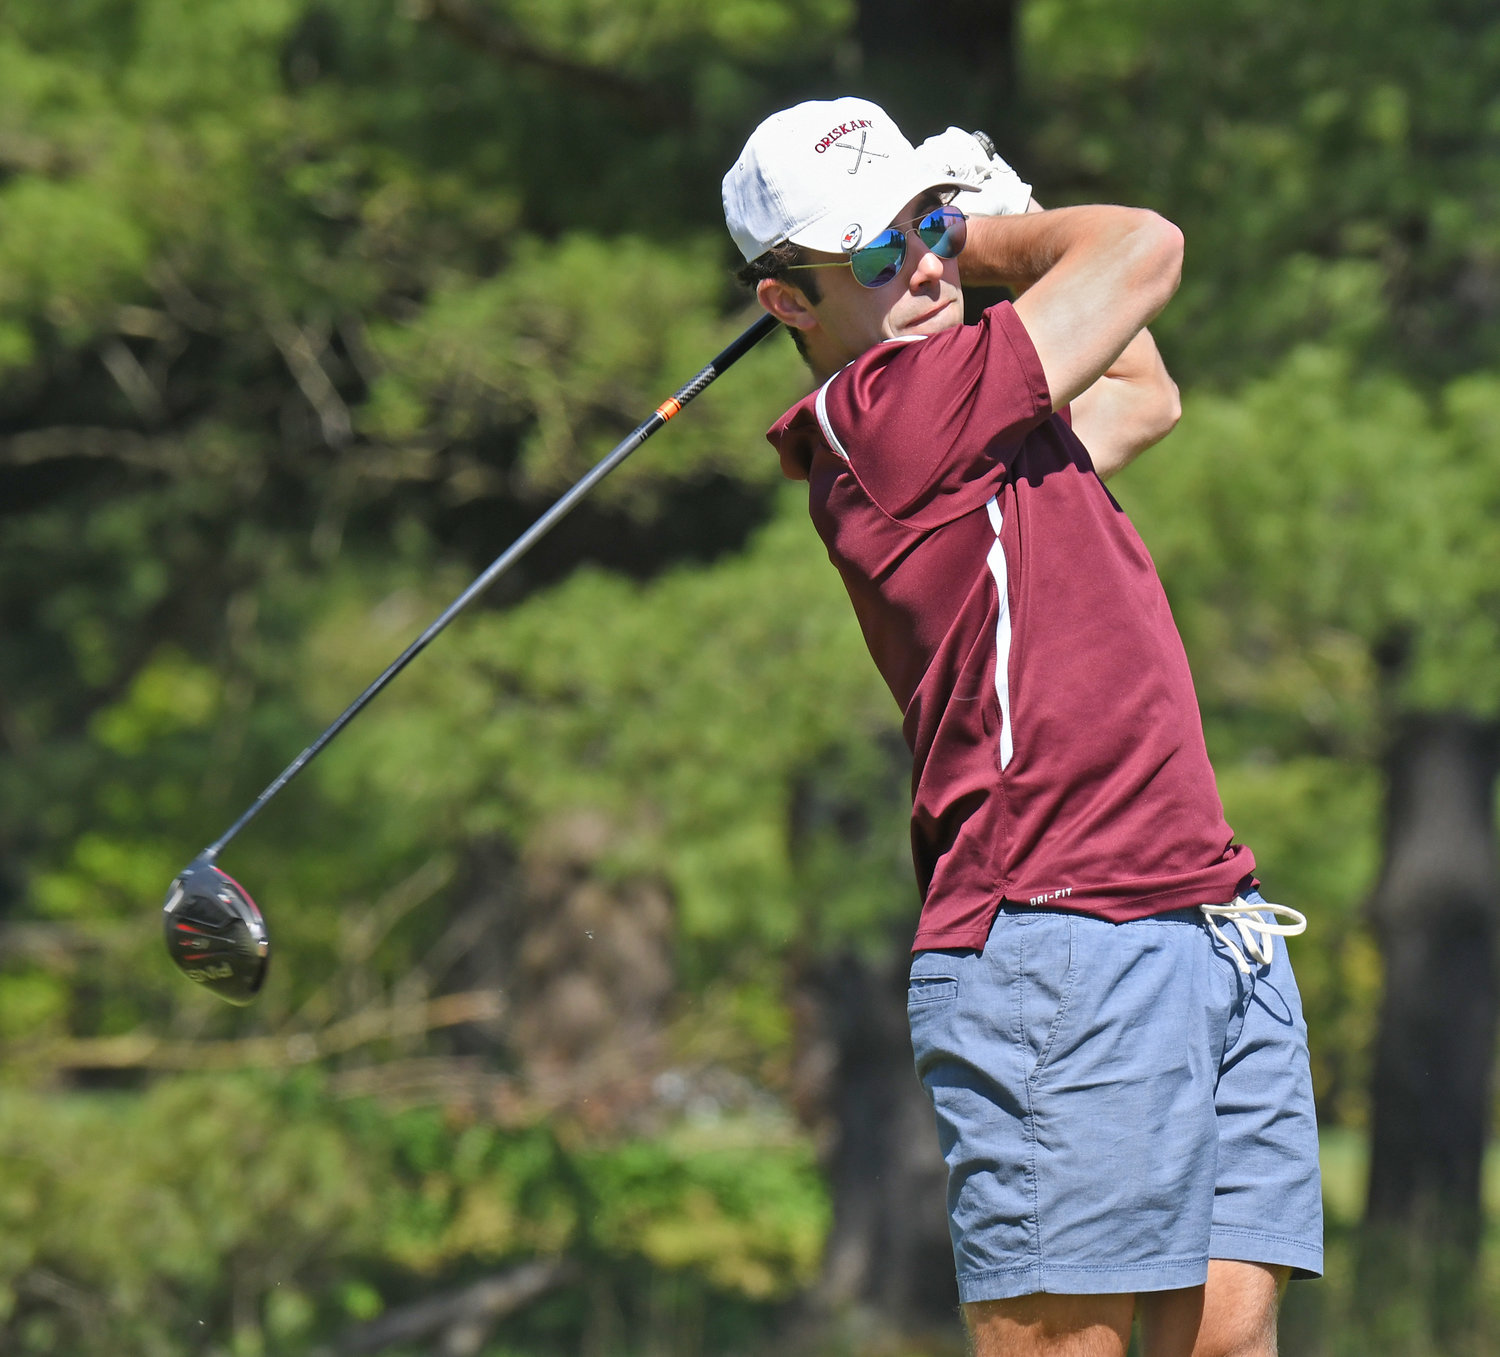 Oriskany senior Nick DeRiso watches his drive on the 10th hole at Crestwood Golf Course Wednesday against Holland Patent. DeRiso has had at least a share of the team’s best score in seven of eight matches this season. Oriskany was 8-0 after the win against HP.